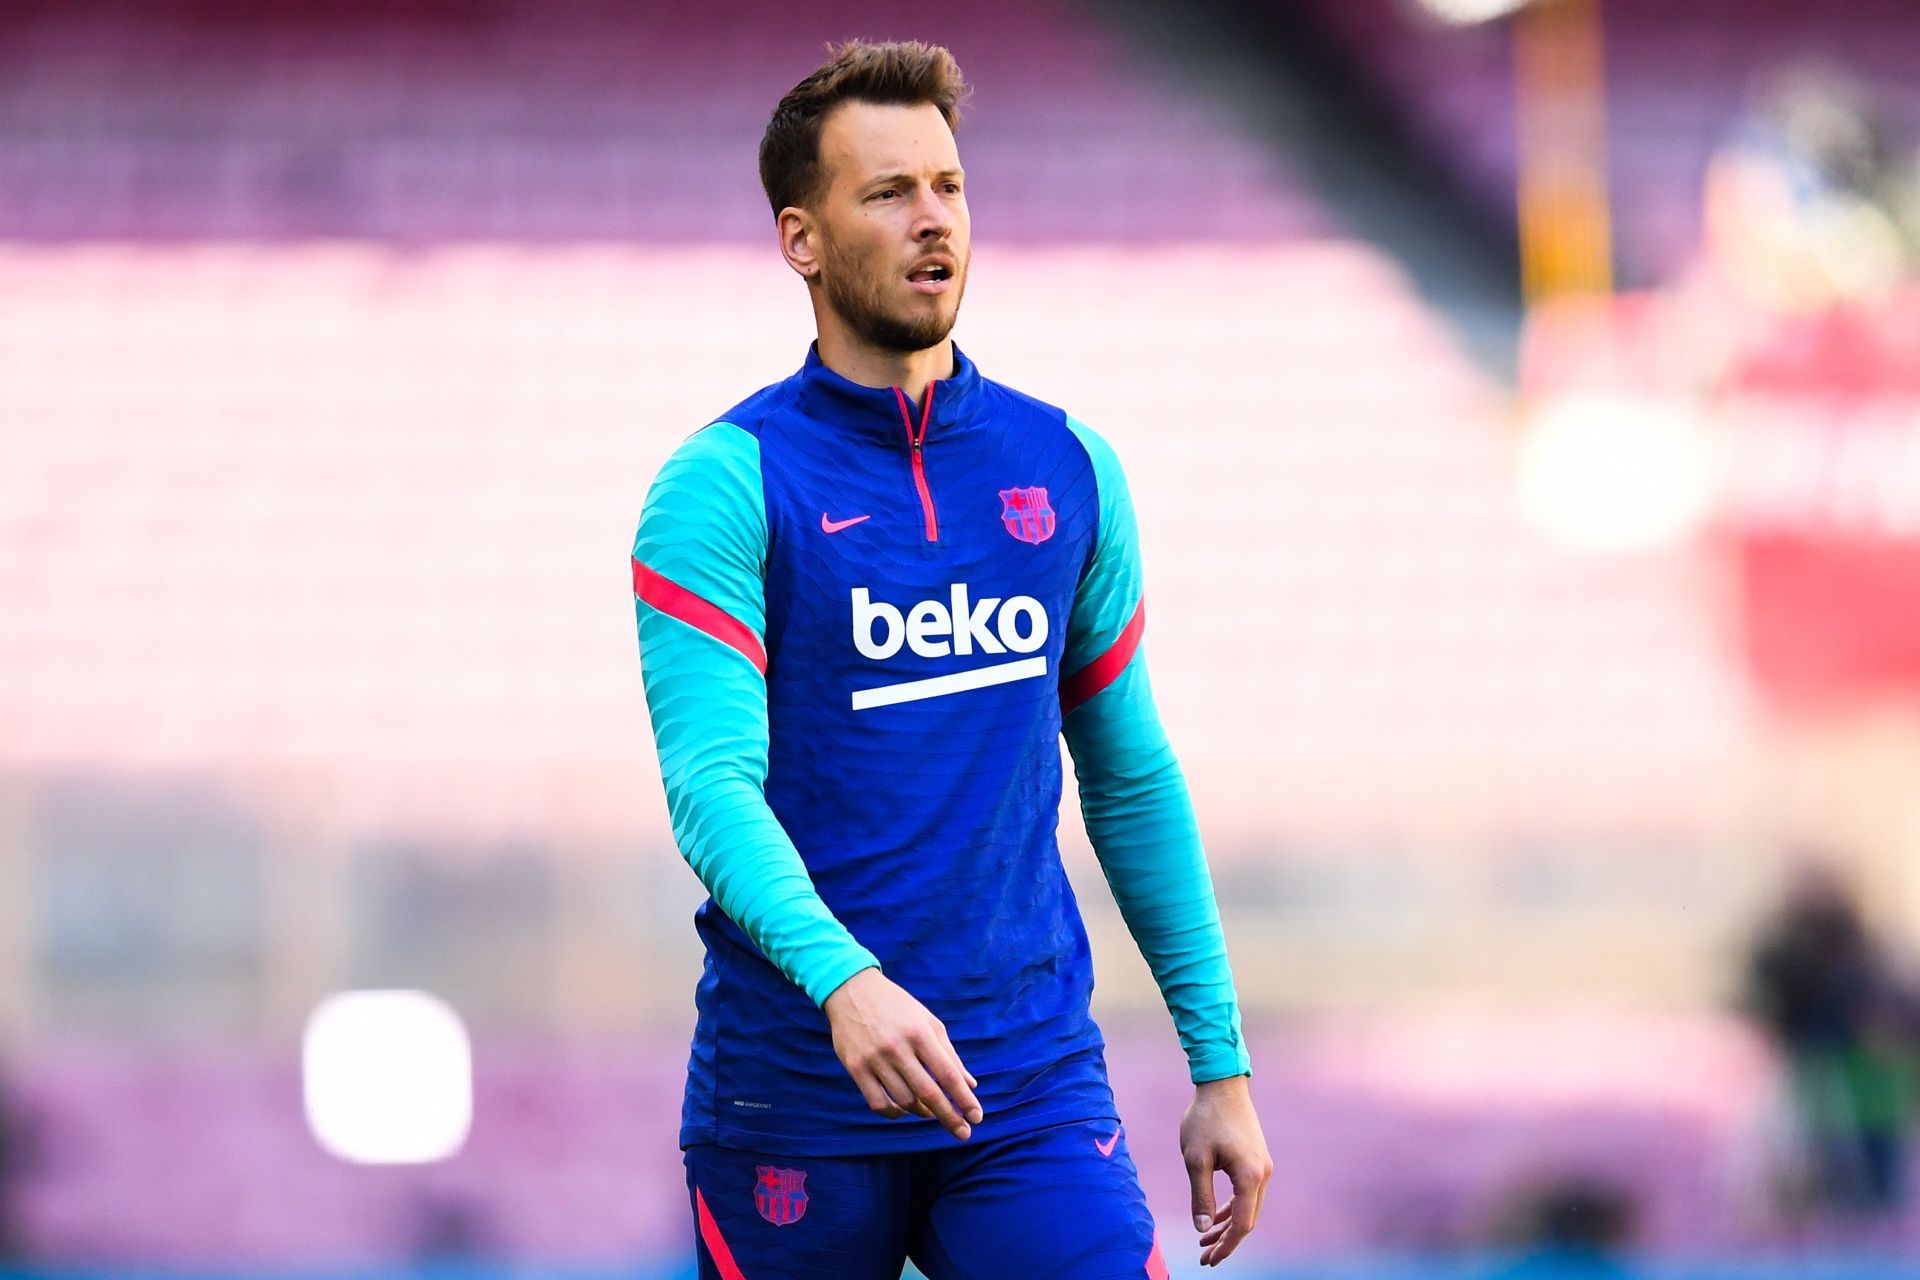 Neto is ready to leave Barcelona and join Everton in January.